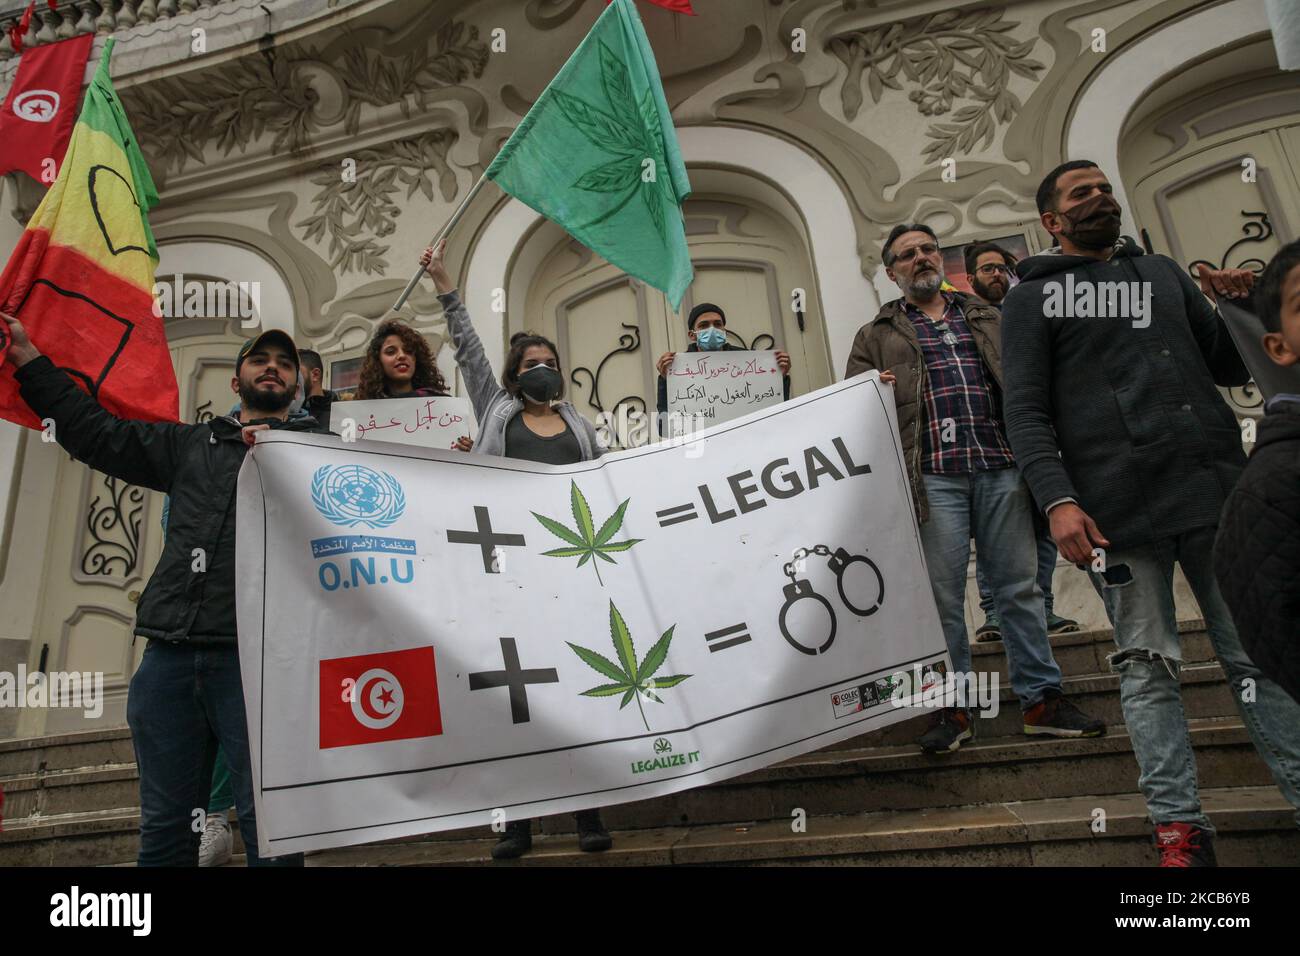 Protesters wave flags as they hold a banner with a drawing of cannabis leaf, handcuffs and the United Nations watermark, and that reads Legal, during a demonstration held on Habib Bourguiba Avenue in Tunis, Tunisia, on March 20, 2021, where demonstrators rallied to call for the decriminalisation and legalization of cannabis use and the liberalisation of its commercialisation. The young demonstrators also demanded the suspension of the application of law 52 on narcotics which is regarded as repressive, and asked for a pardon for all those detained for drug use. (Photo by Chedly Ben Ibrahim/NurP Stock Photo